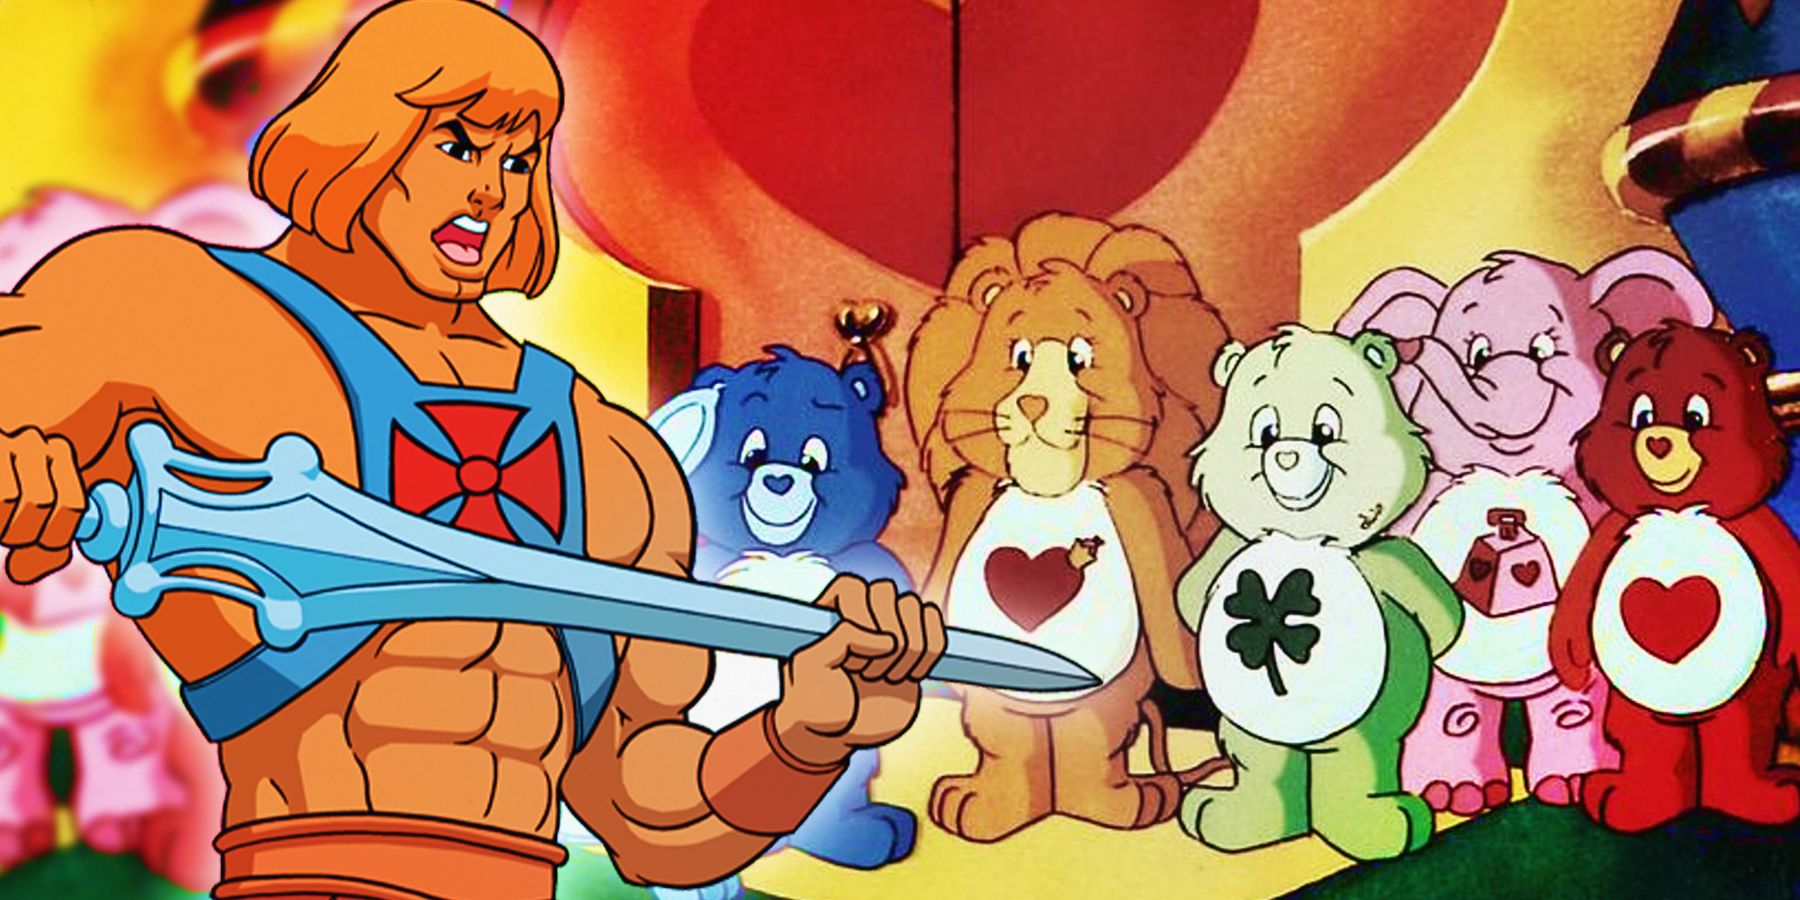 Care Bears: 8 things you never knew about the toy and movie